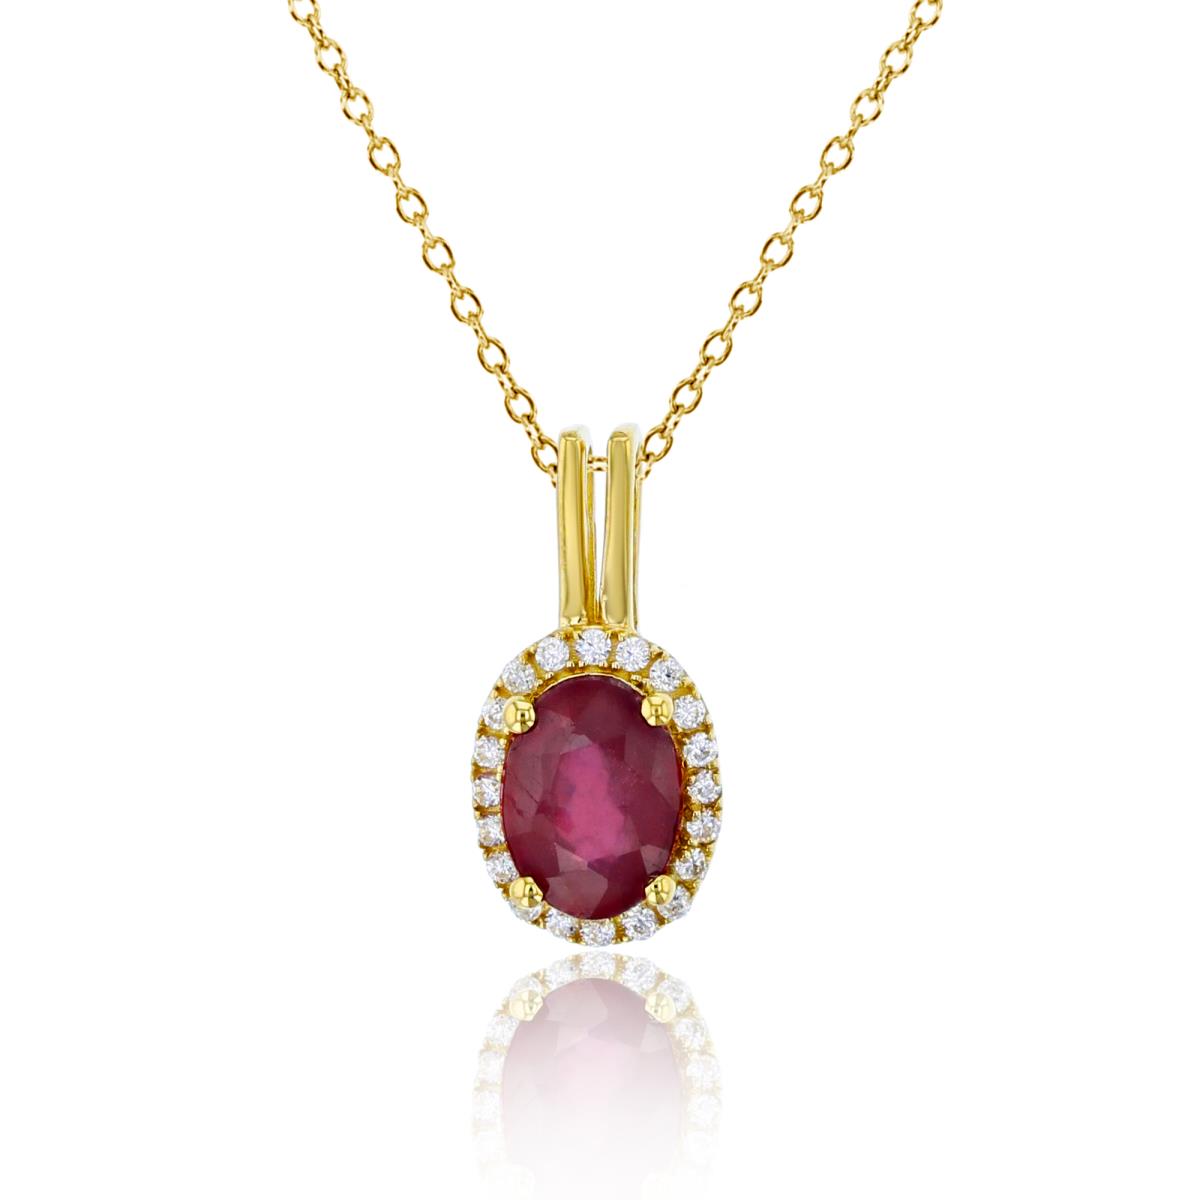 10K Yellow Gold 0.10cttw Rnd Diamond & 7x5mm Ov Glass Filled Ruby Halo Oval 18"Necklace